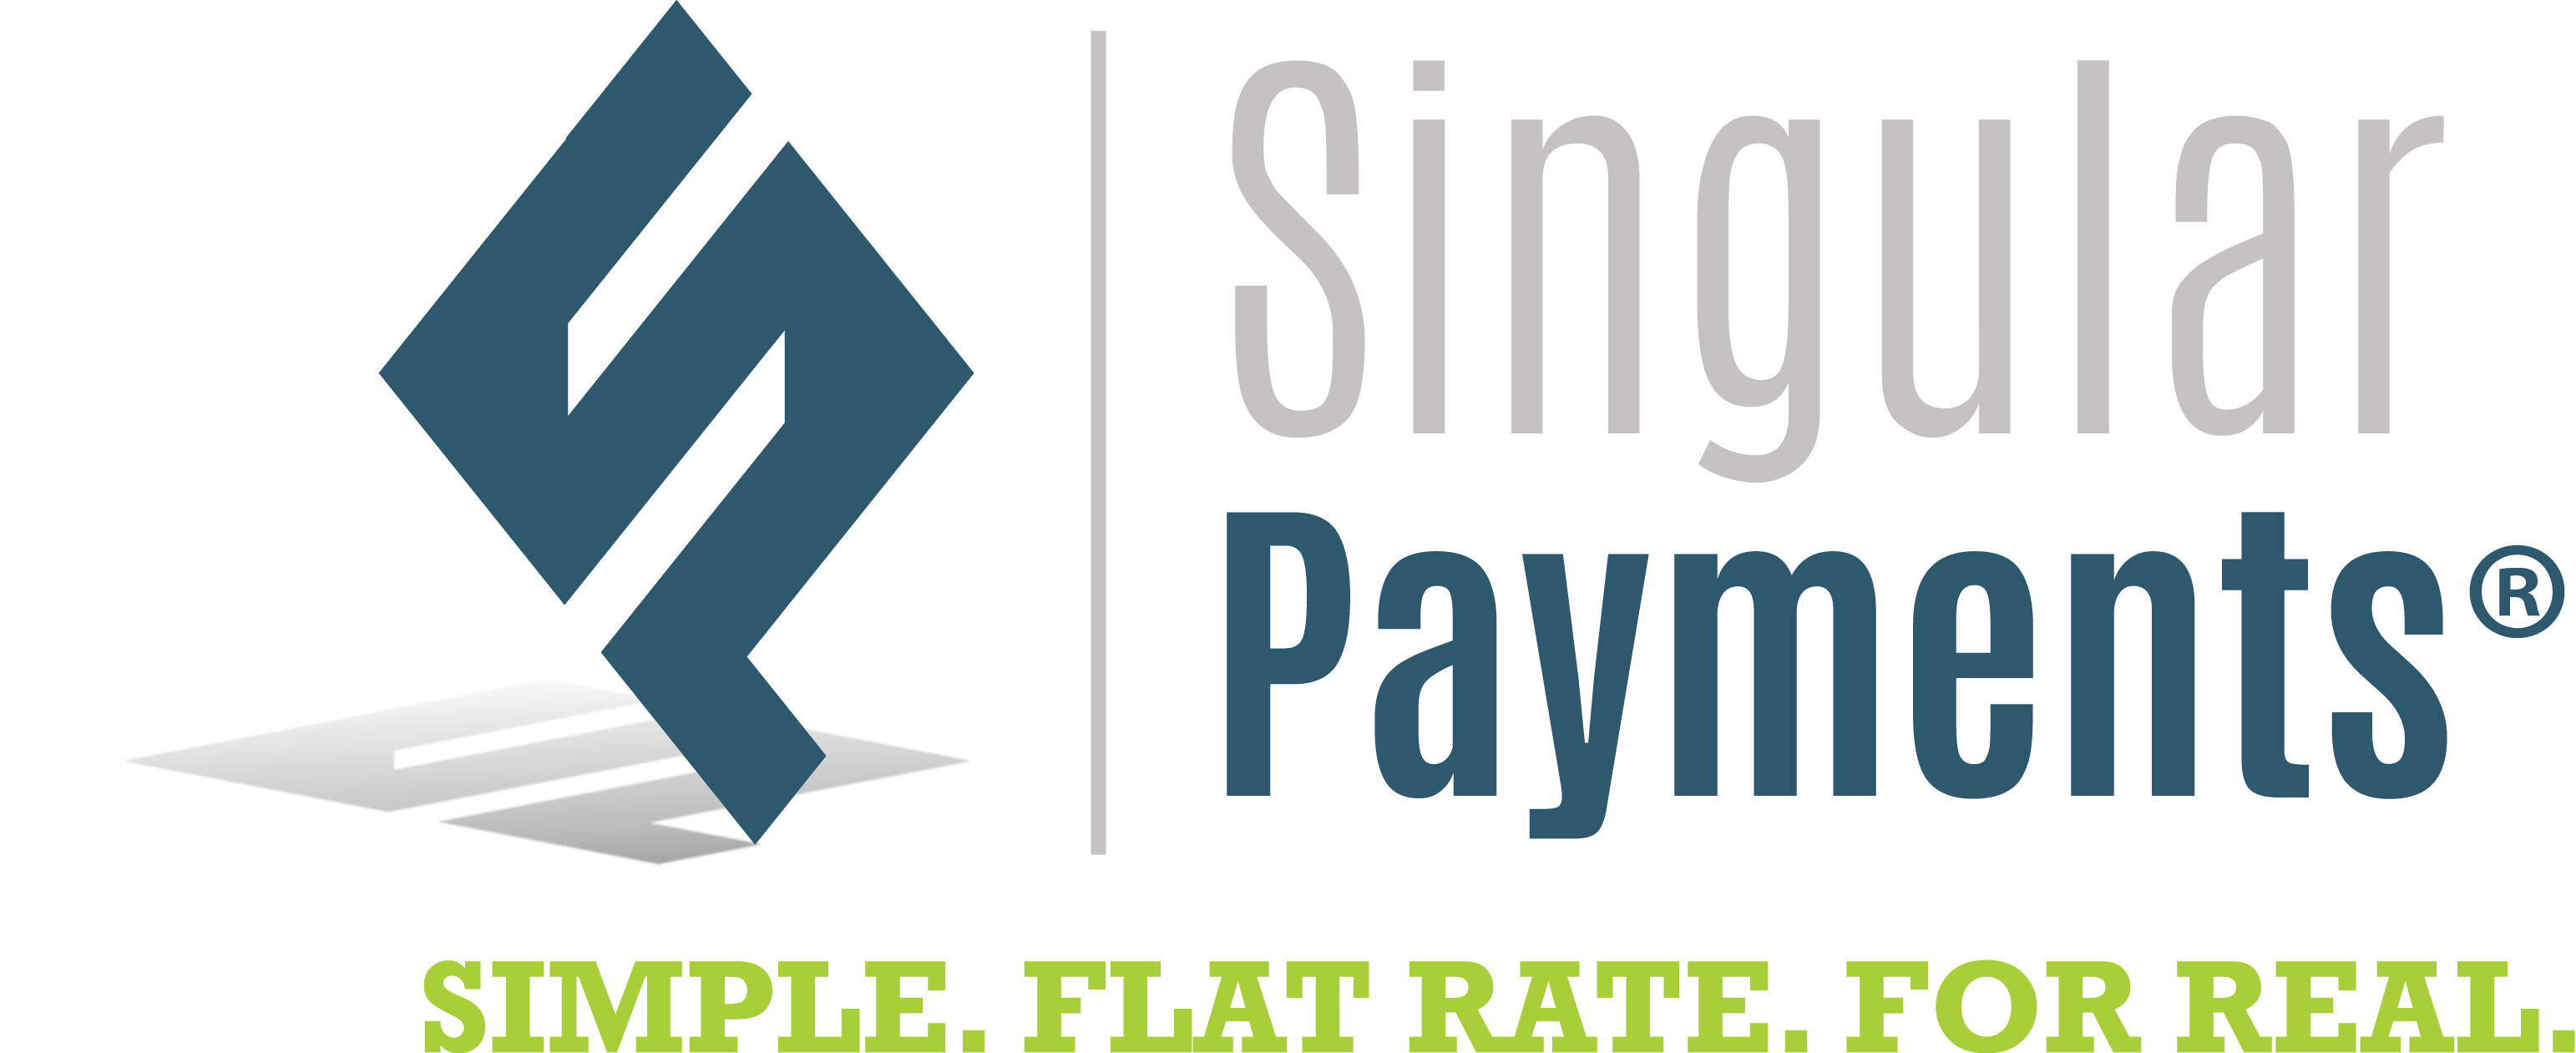 Singular Payments - Flat rate payment processing for small to medium-sized businesses.